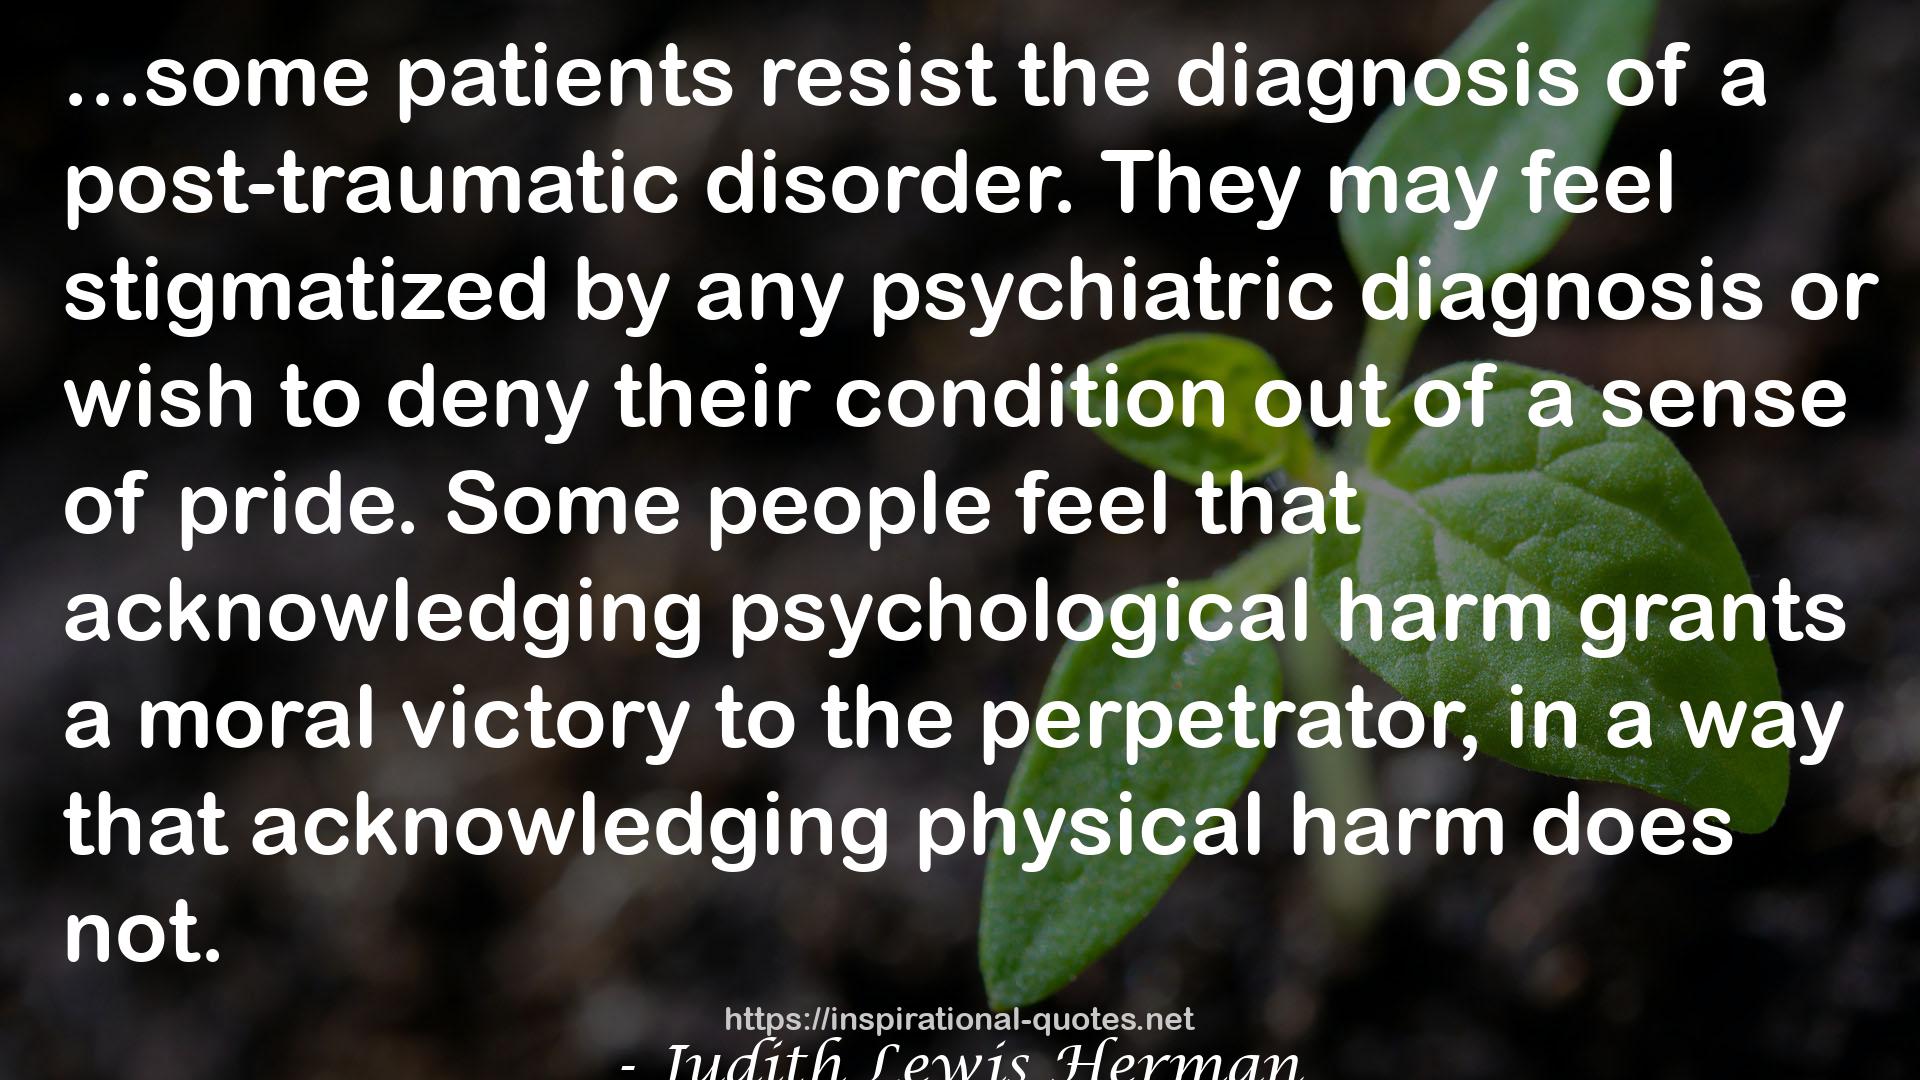 psychological harm  QUOTES